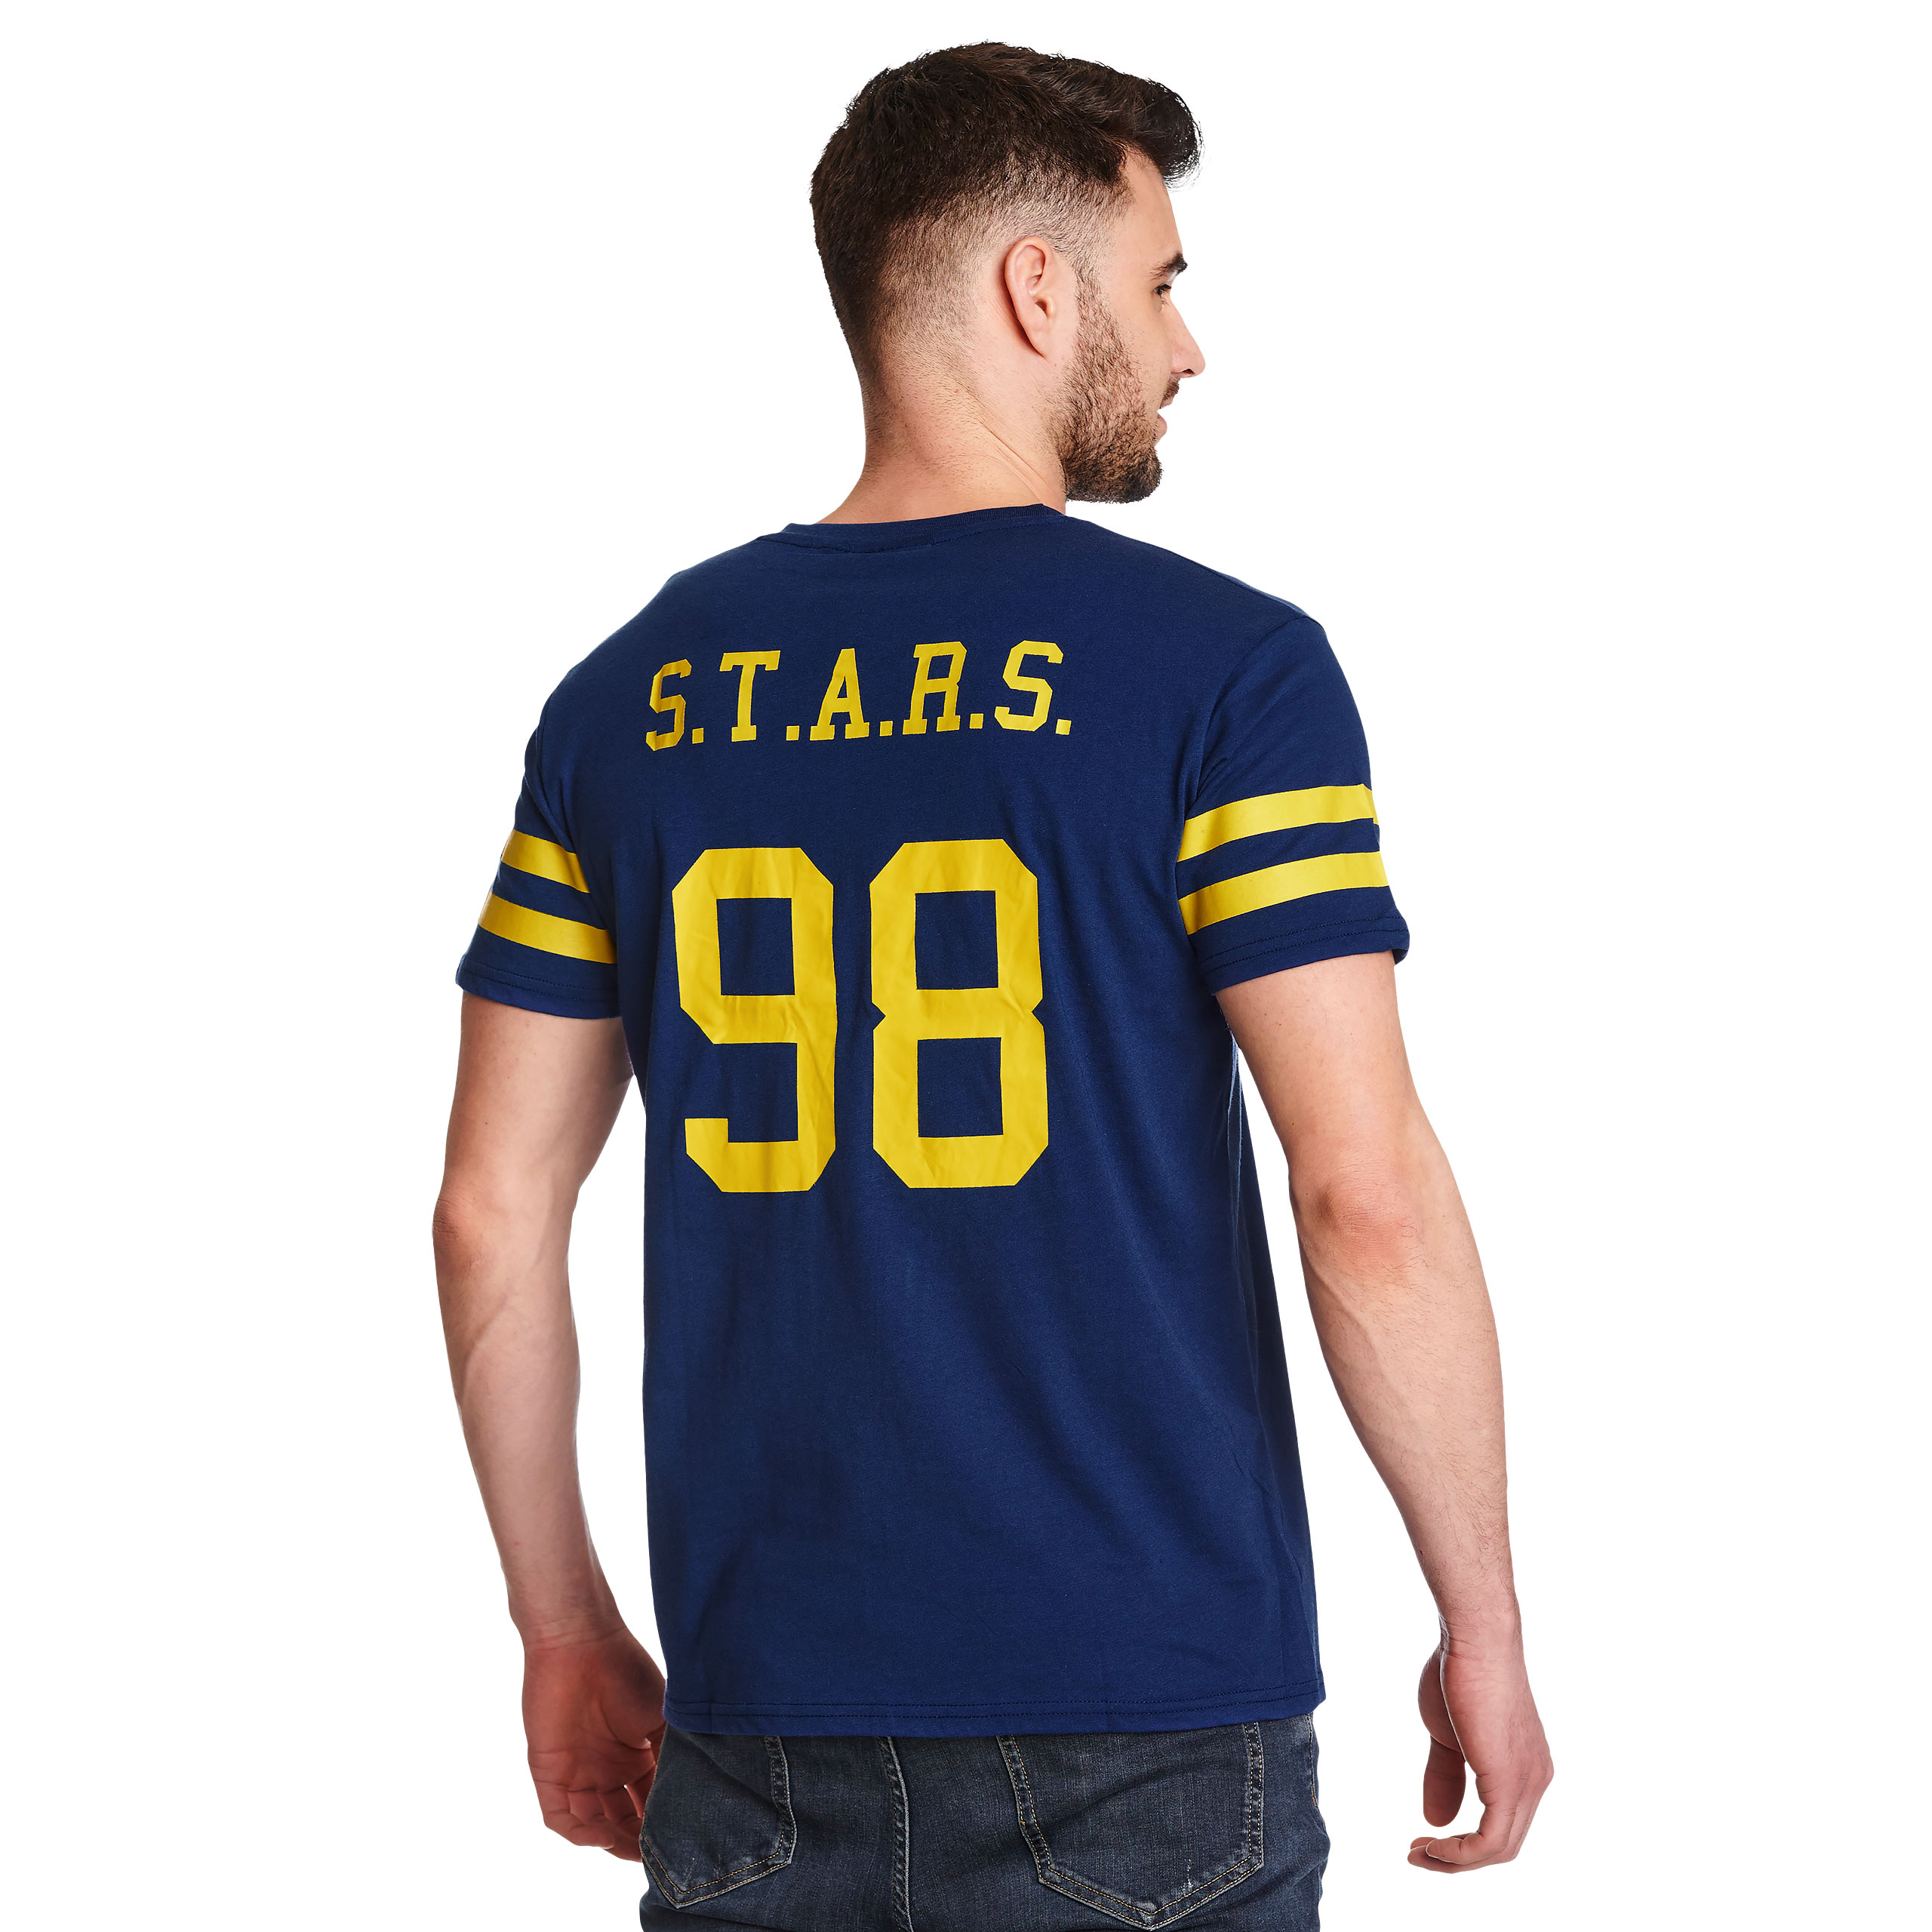 Resident Evil - S.T.A.R.S. Voetbal T-shirt blauw